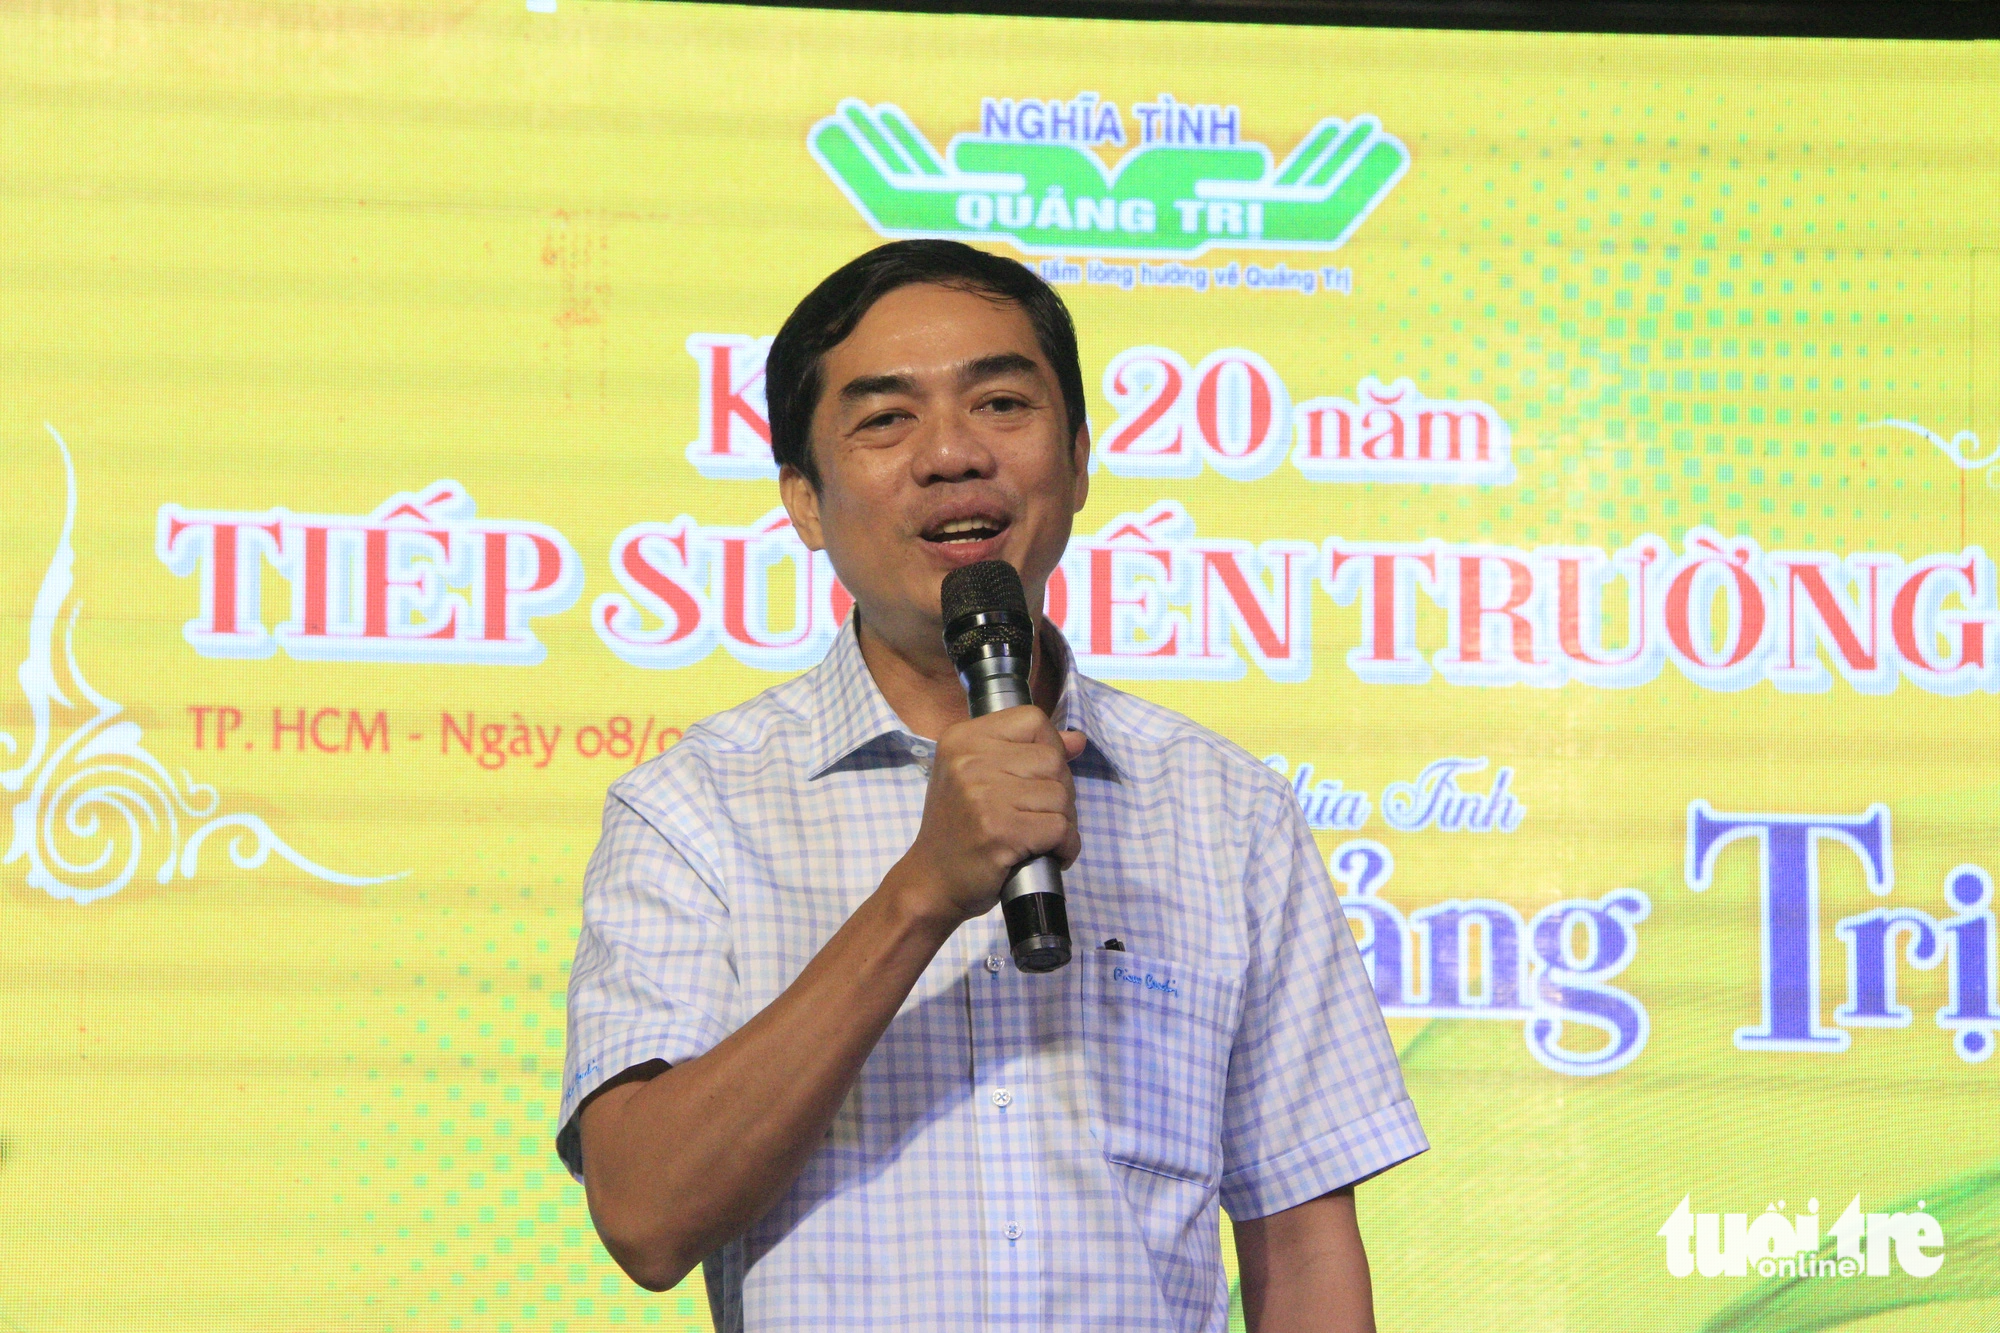 Nguyen Khac Cuong, deputy editor-in-chief of the Tuoi Tra newspaper, thanks the Quang Tri Friendship Club for supporting the newspaper over the past 20 years - photo: Cong Trieu